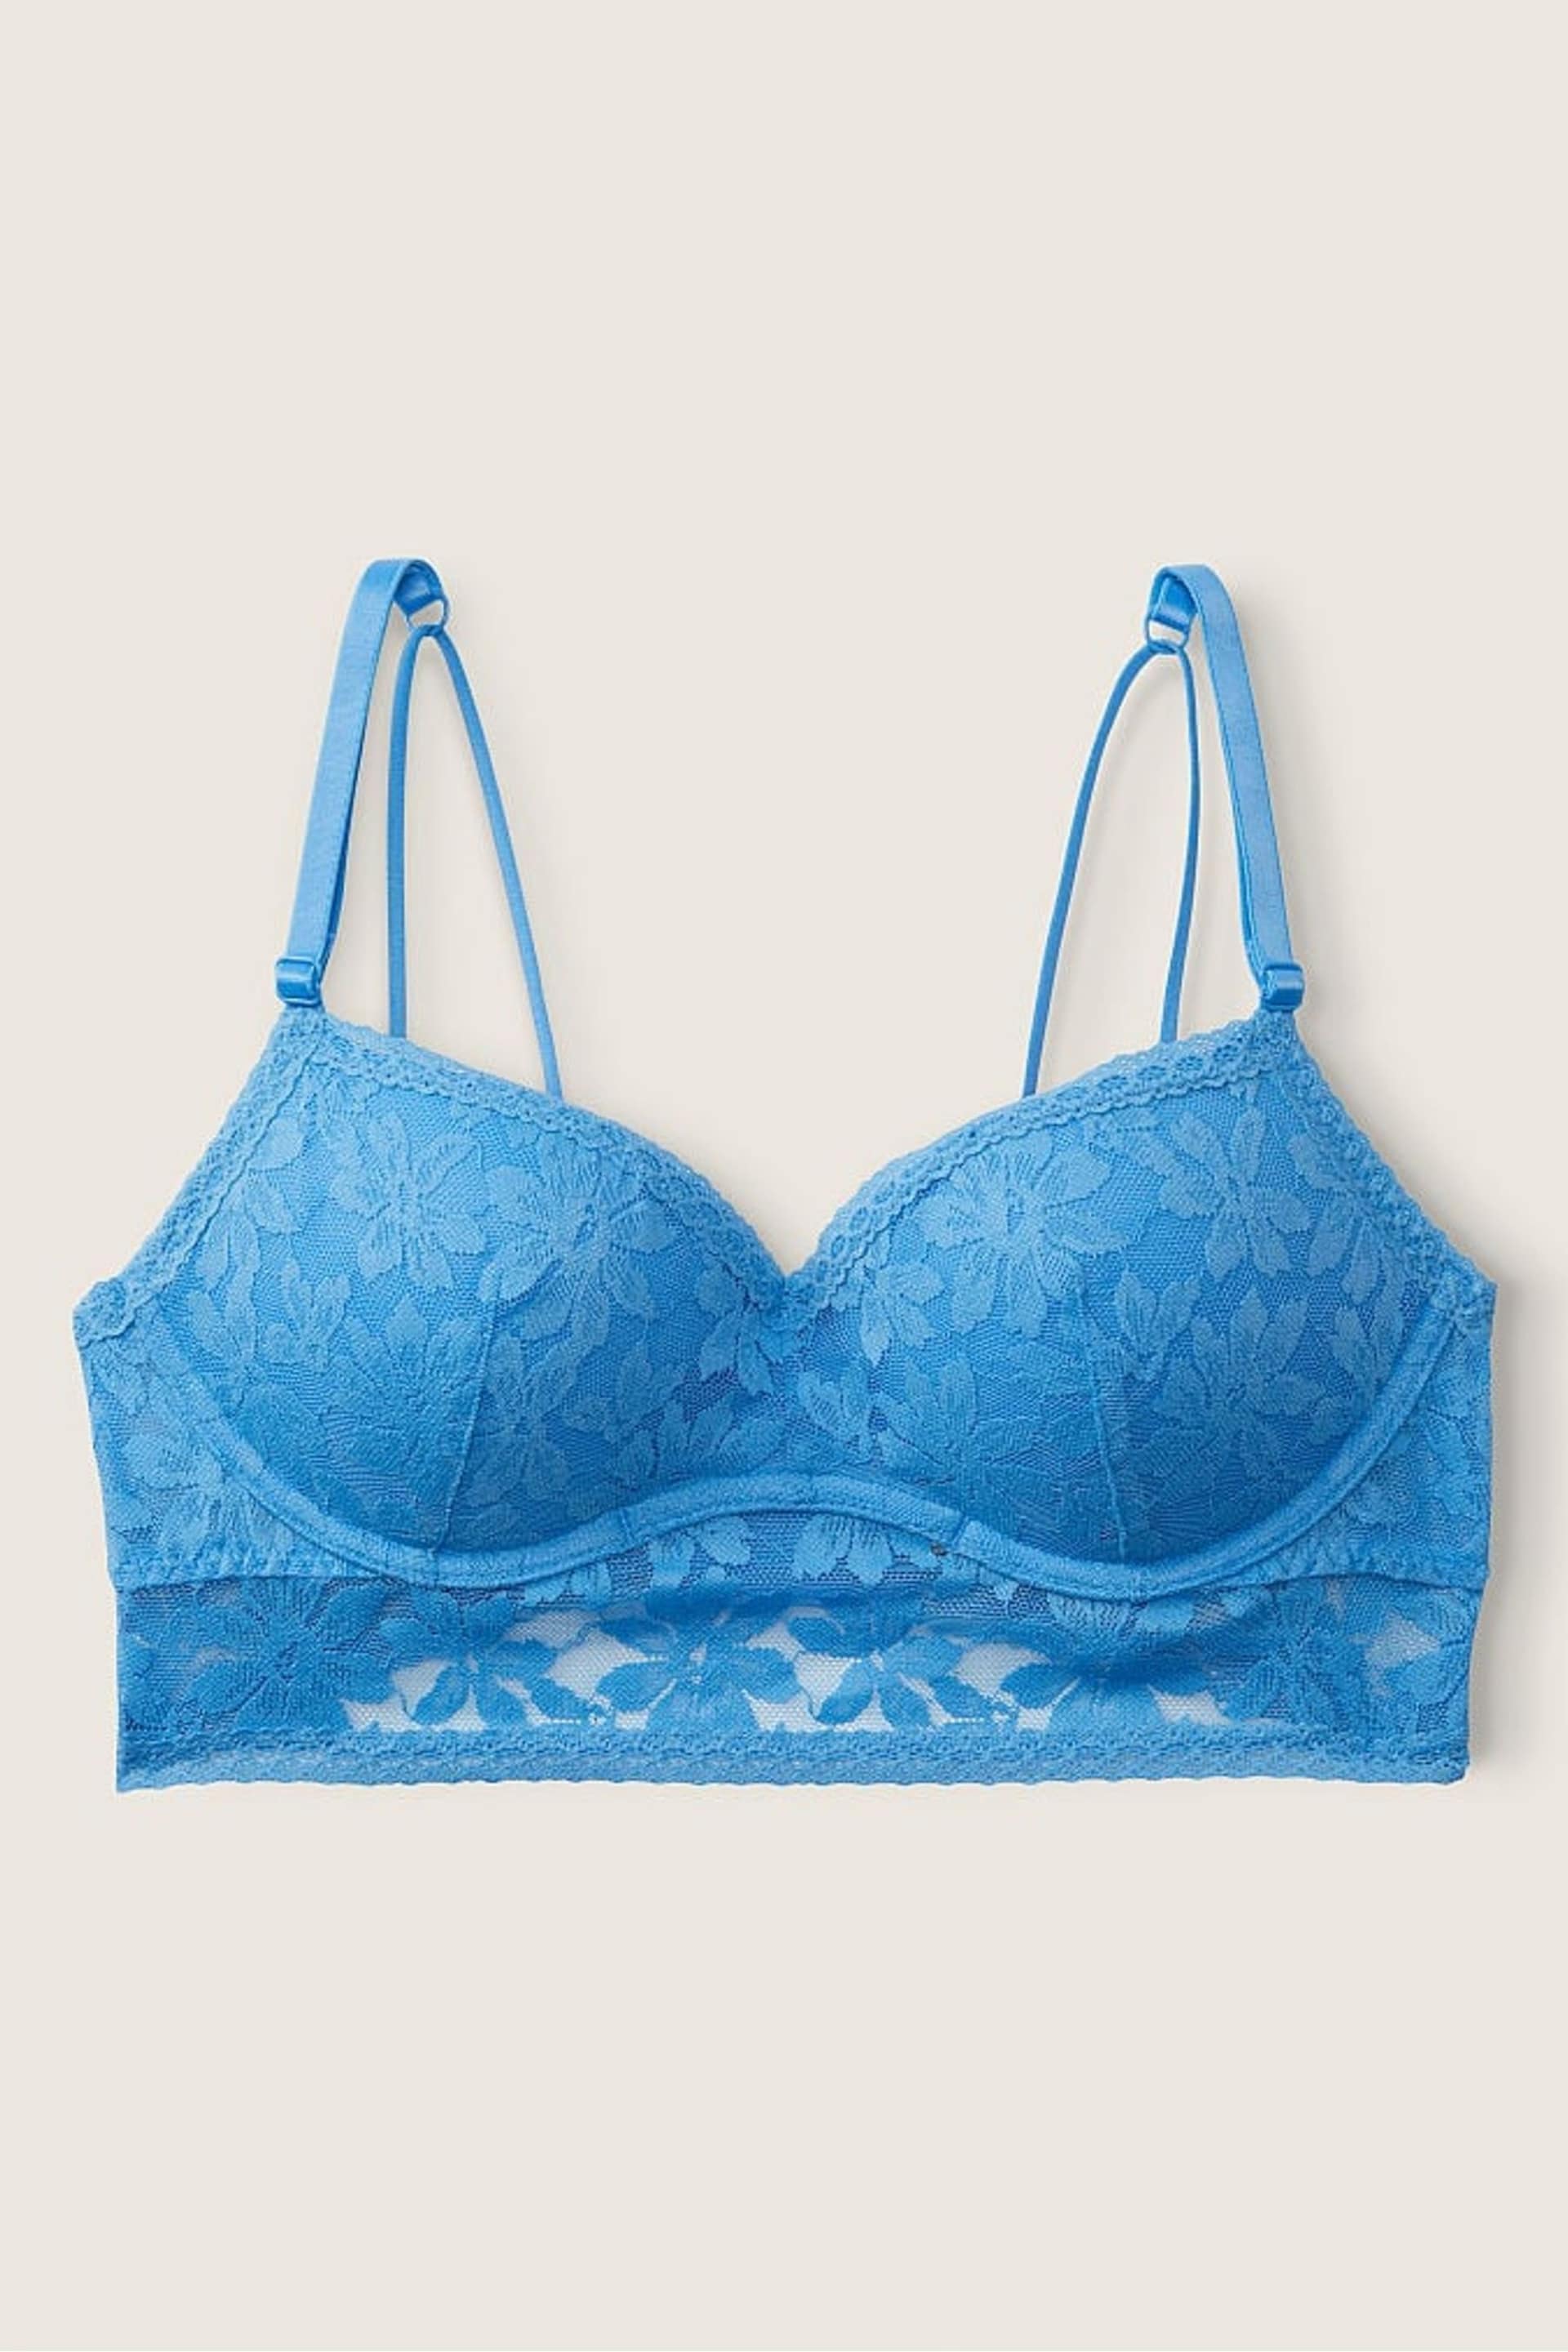 Victoria's Secret PINK Azure Sky Blue Lace Wired Push Up Bralette - Image 3 of 4